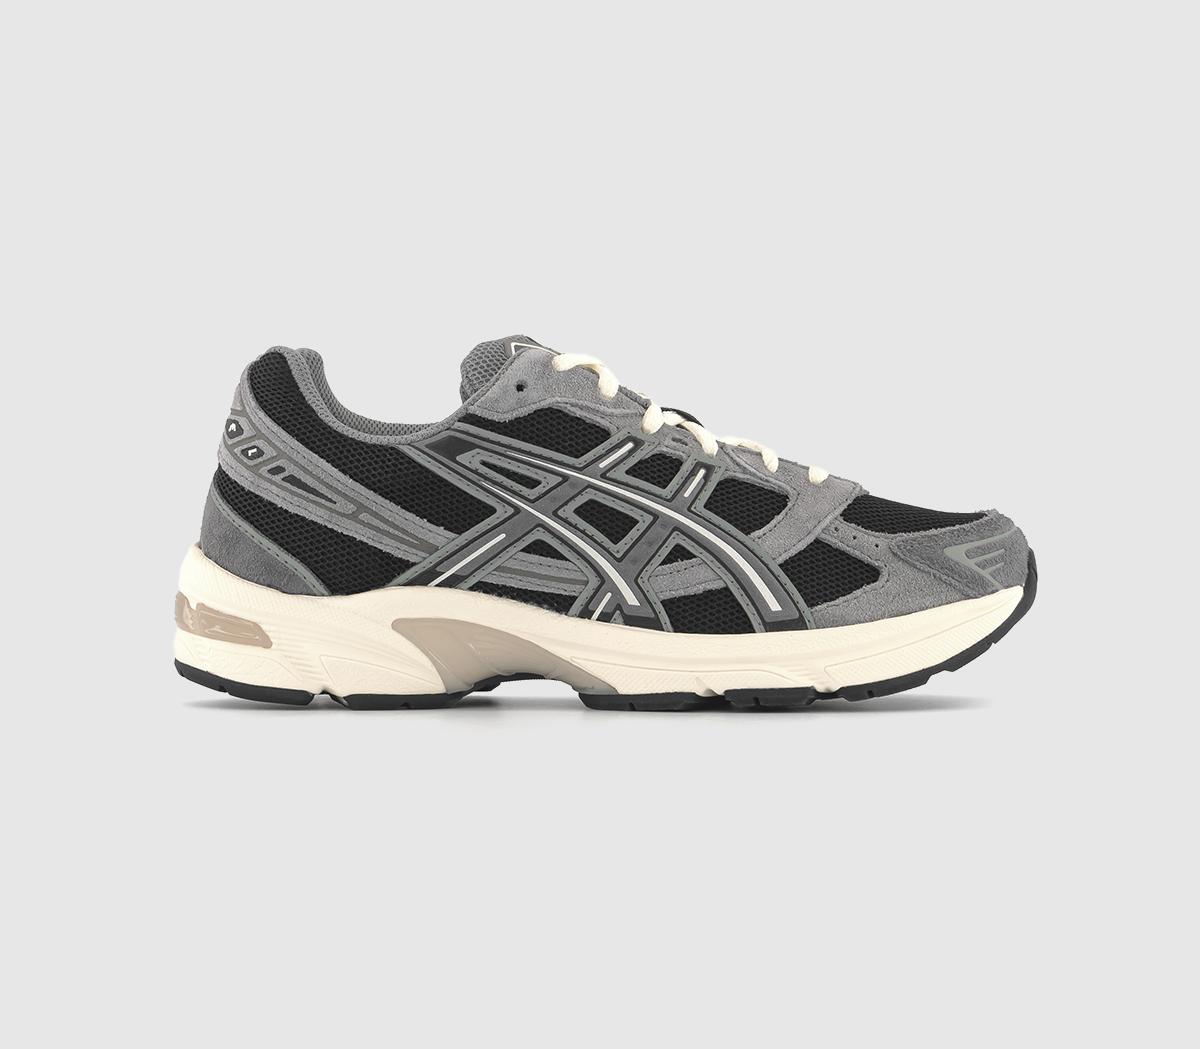 ASICS Gel 1130 Trainers Black Carbon - Women's Trainers